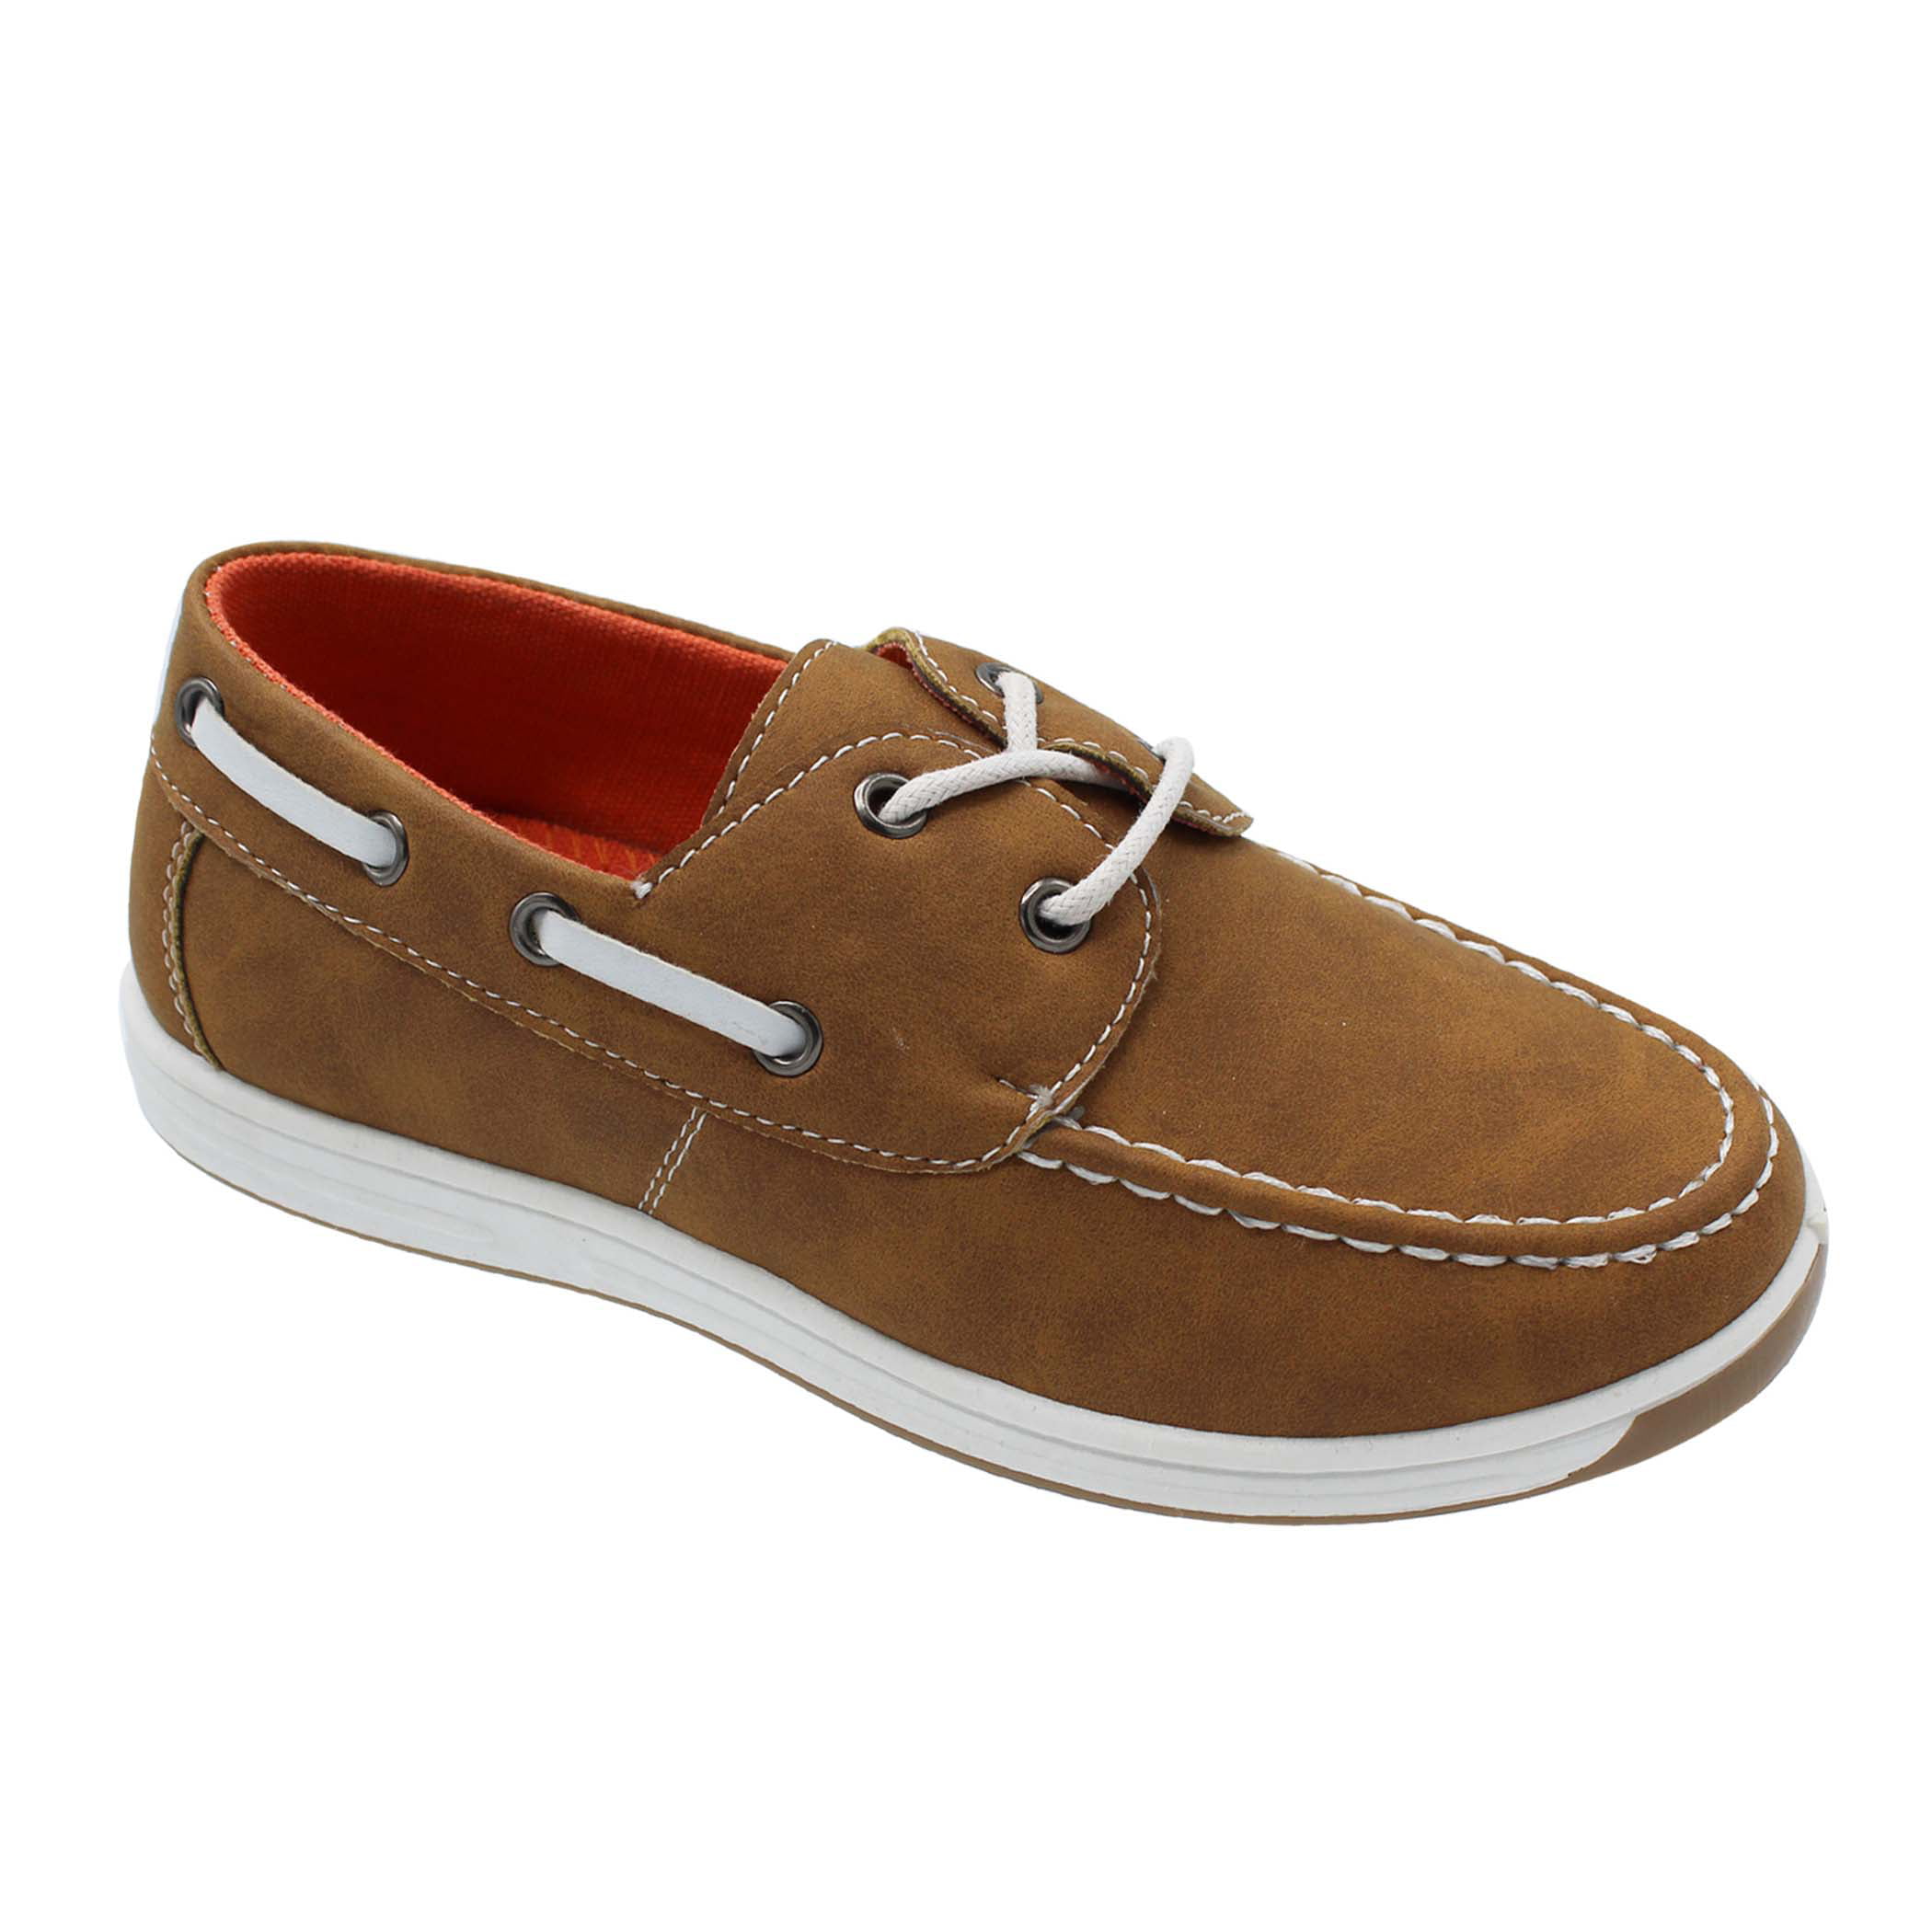 Boys Loafers Shoes Dress Casual Loafers 